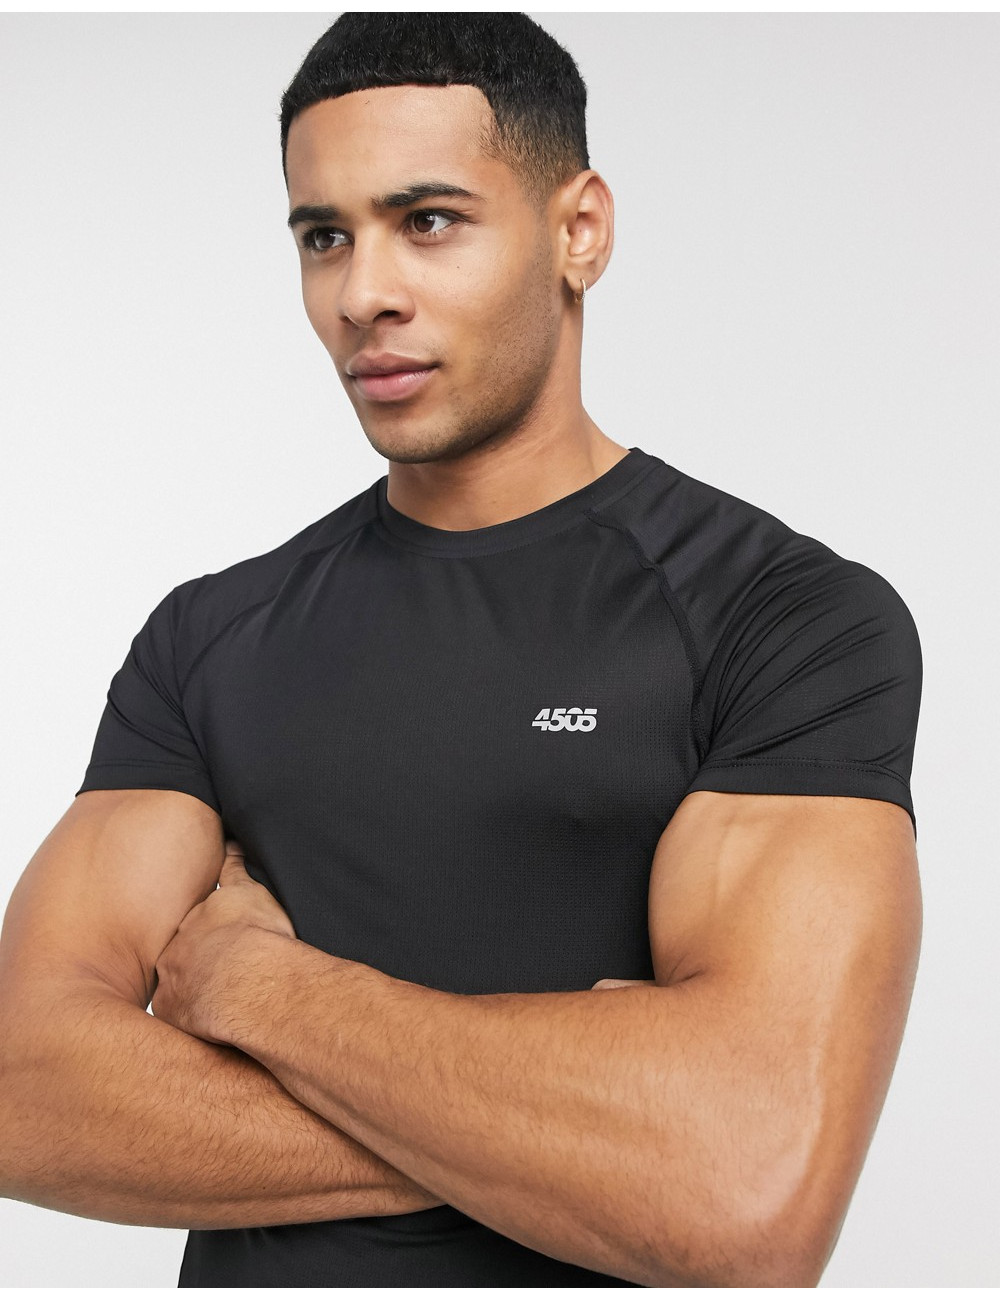 ASOS 4505 icon muscle...